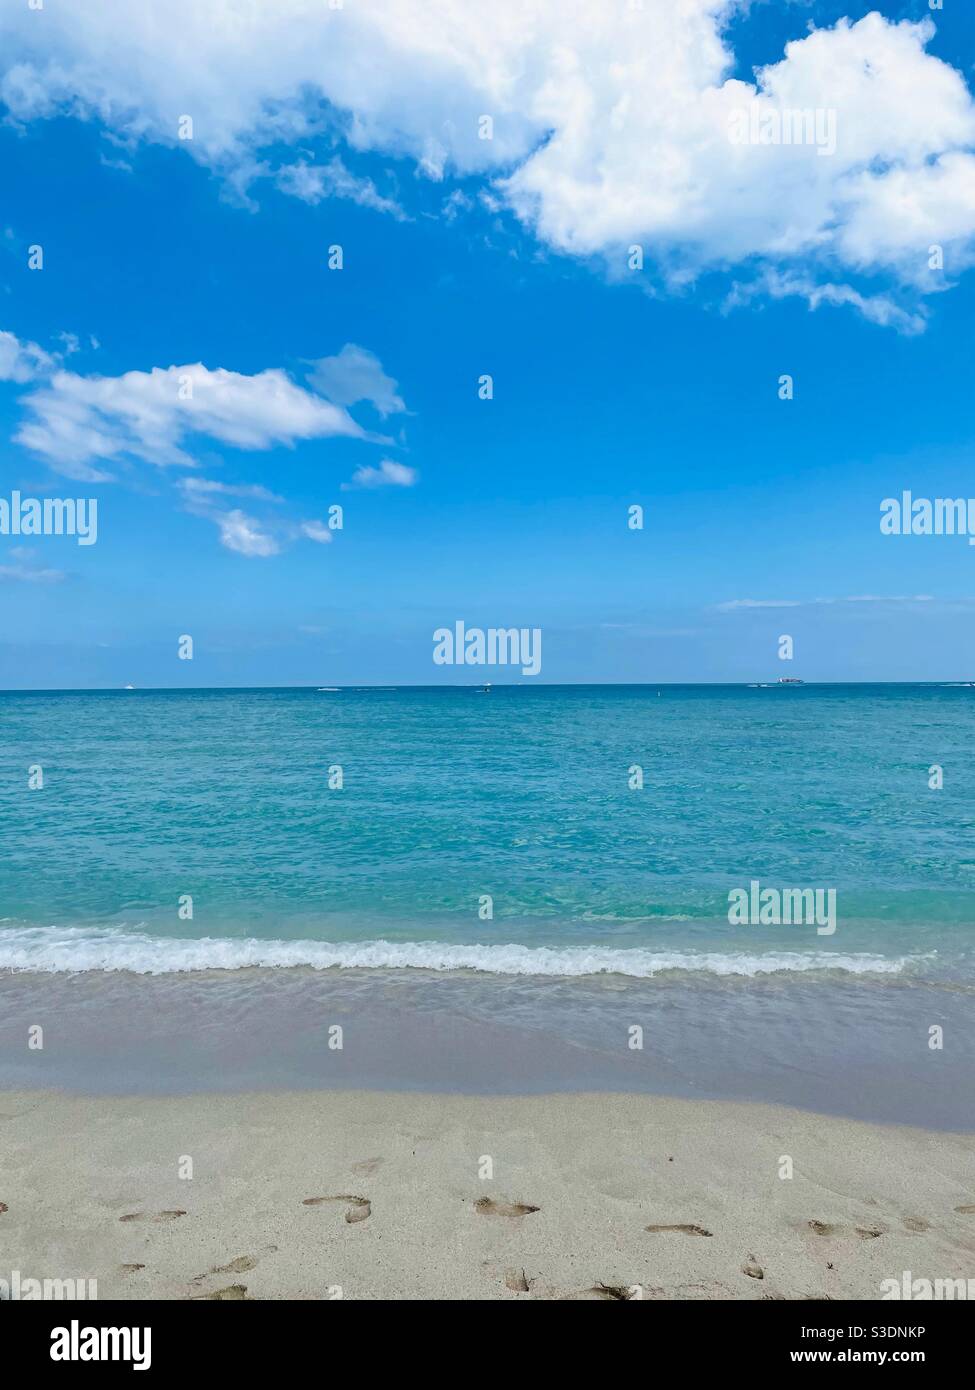 Miami Beach, Florida, USA boasts dazzling colors of bright blue skies with fluffy white clouds, an ocean that changes from deep blue to turquoise as the white foamy surf breaks on a sandy beach Stock Photo